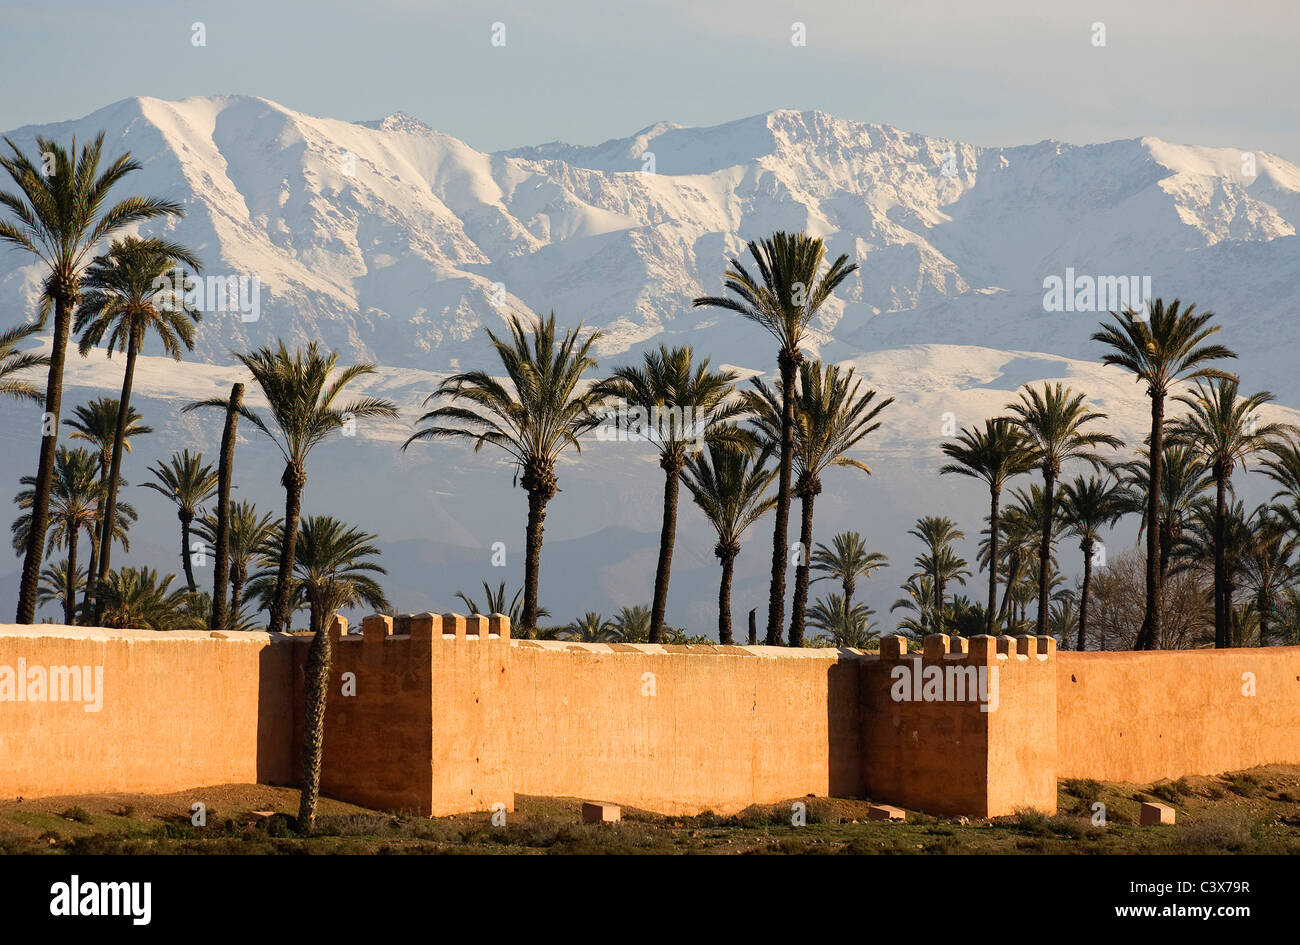 The ramparts of Marrakesh against the background of the snow-capped High Atlas mountains. Morocco. Stock Photo